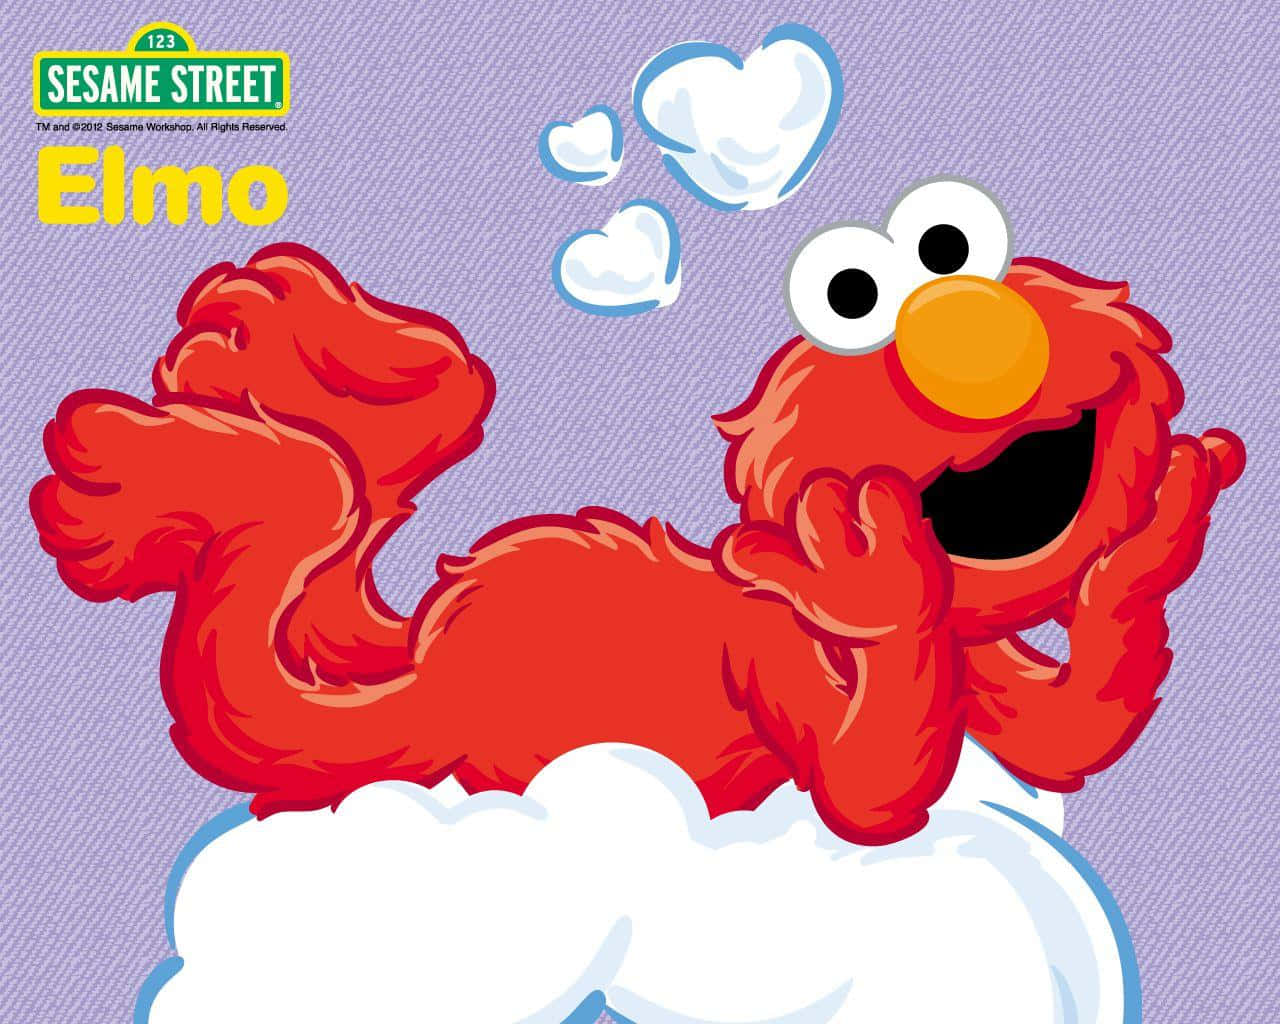 Get in on the fun with Sesame Street!